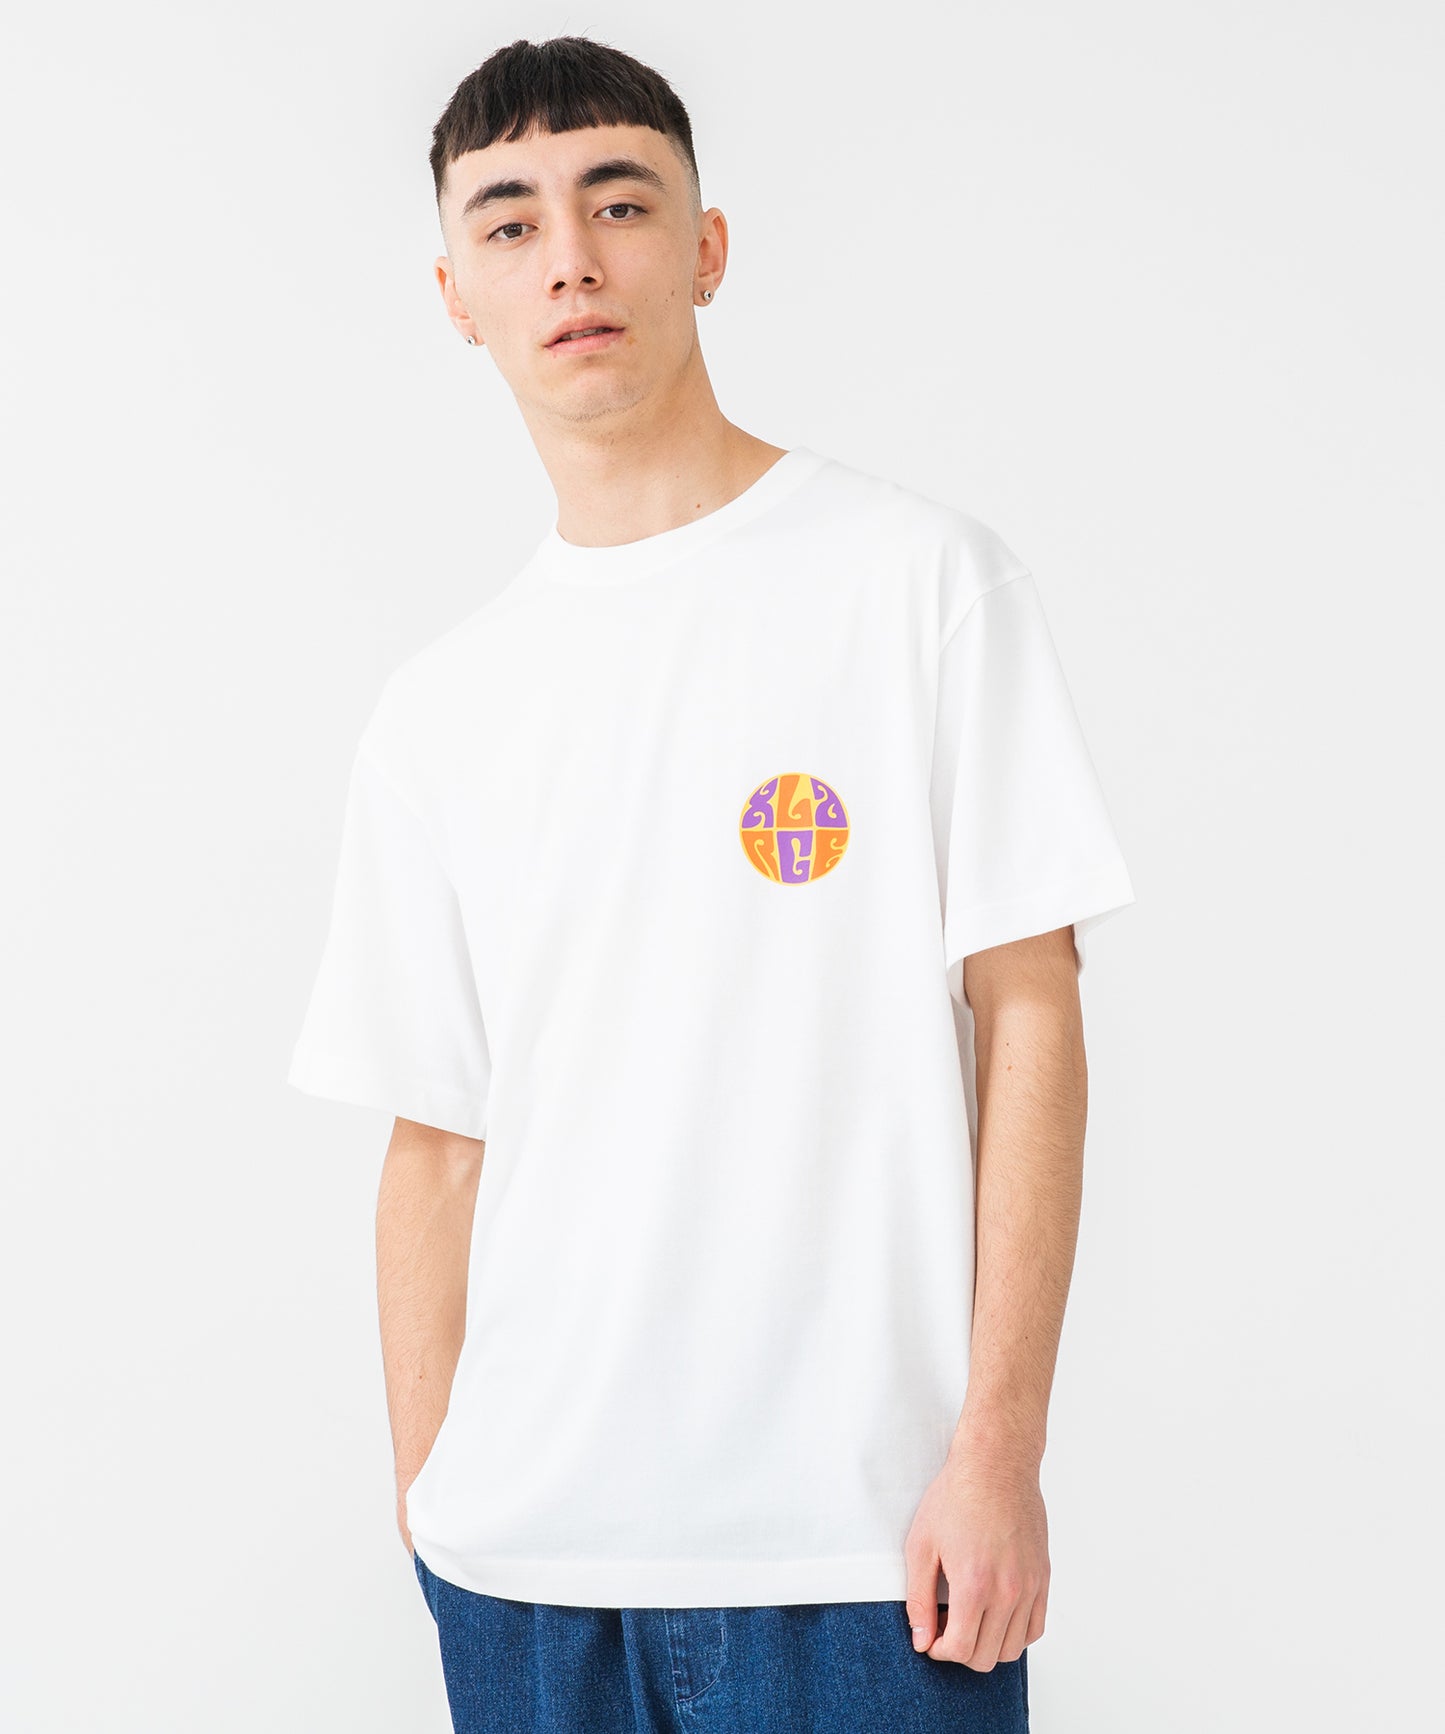 S/S TEE PSYCHEDELIC T-SHIRT XLARGE  